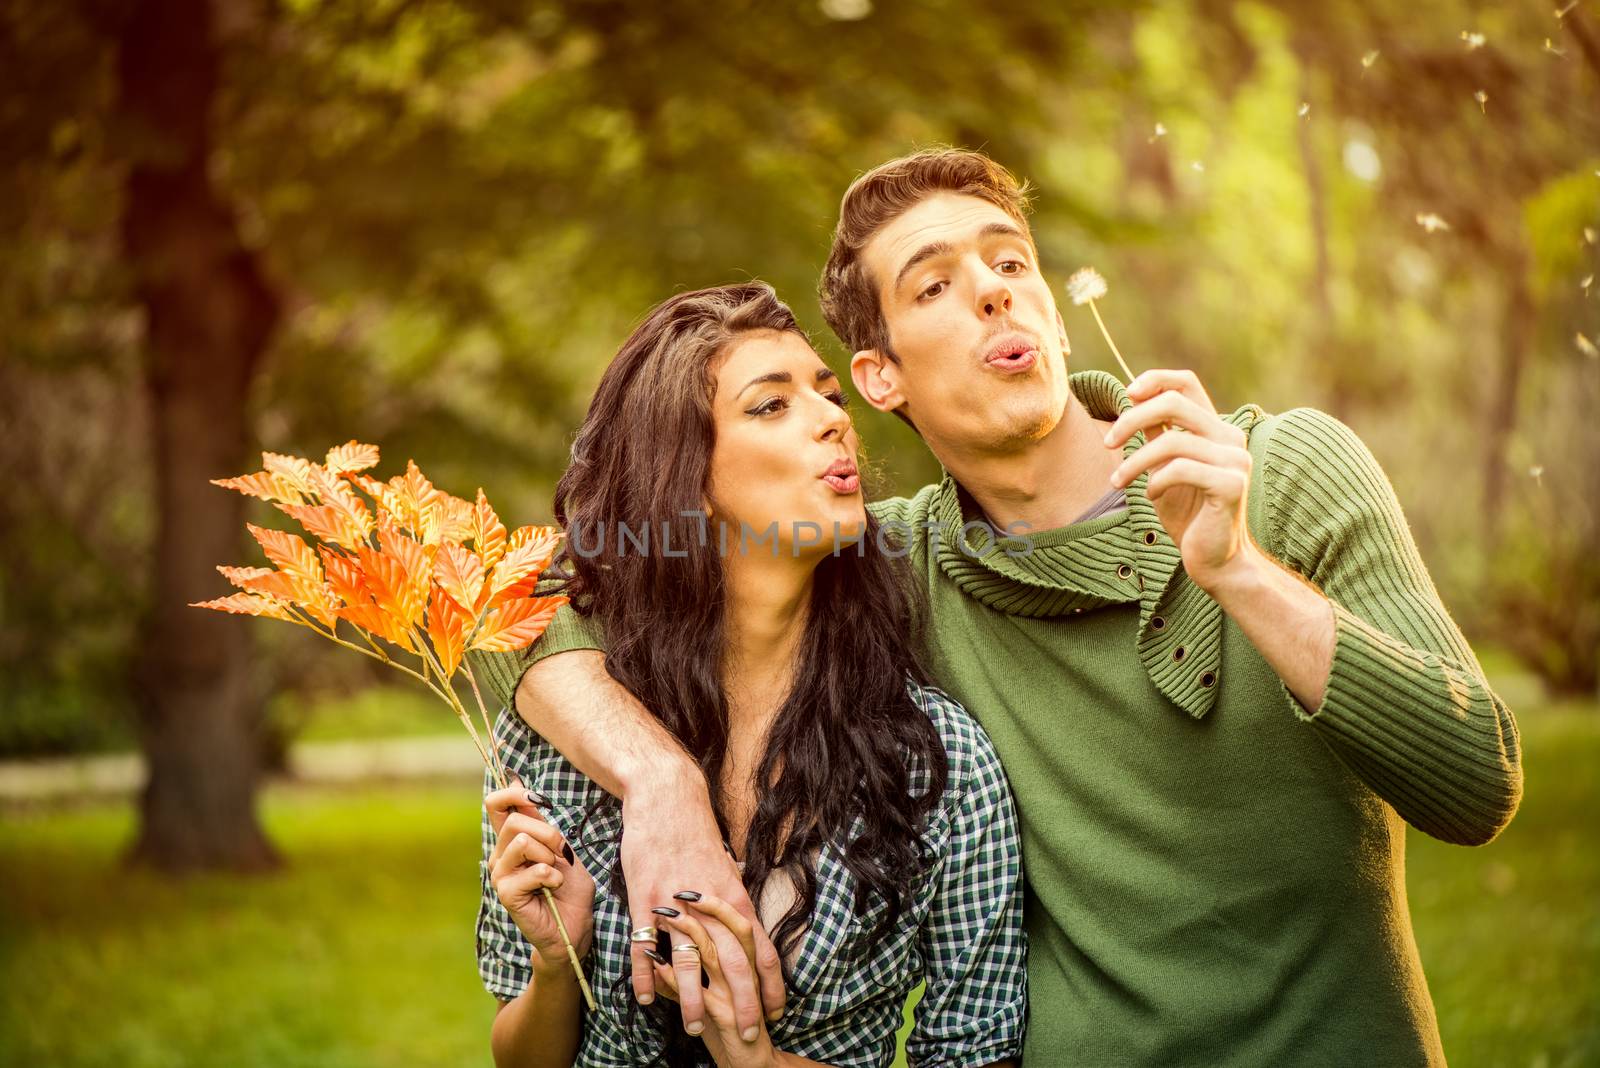 Young heterosexual couple walking in the park, blowing dandelion and holding autumn leaves.